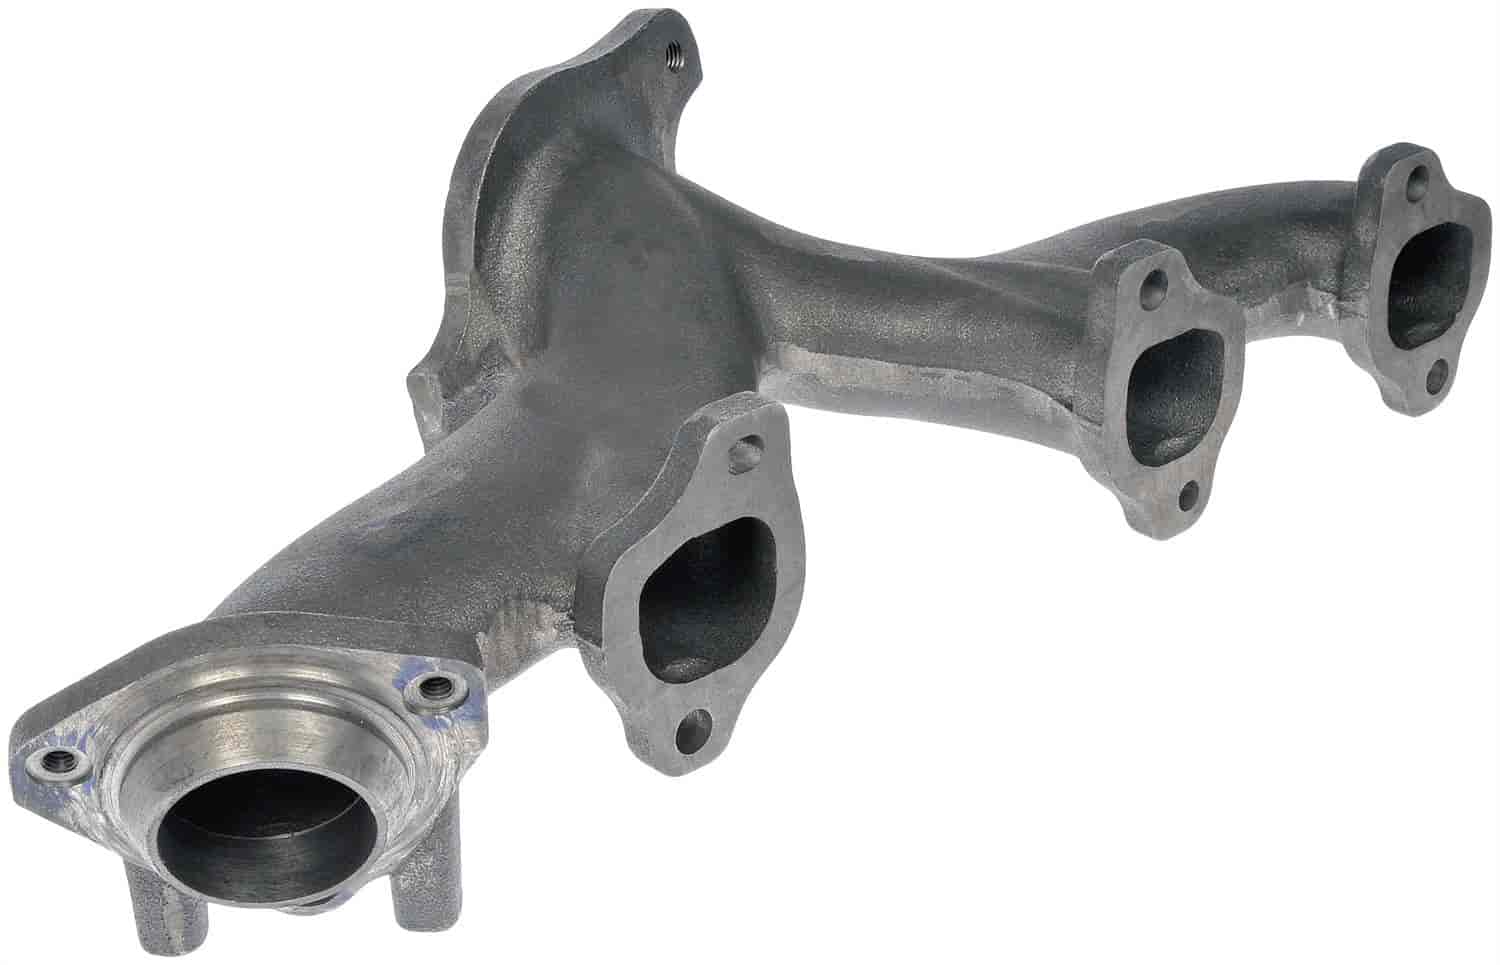 Exhaust Manifold - Includes Hardware And Gasket